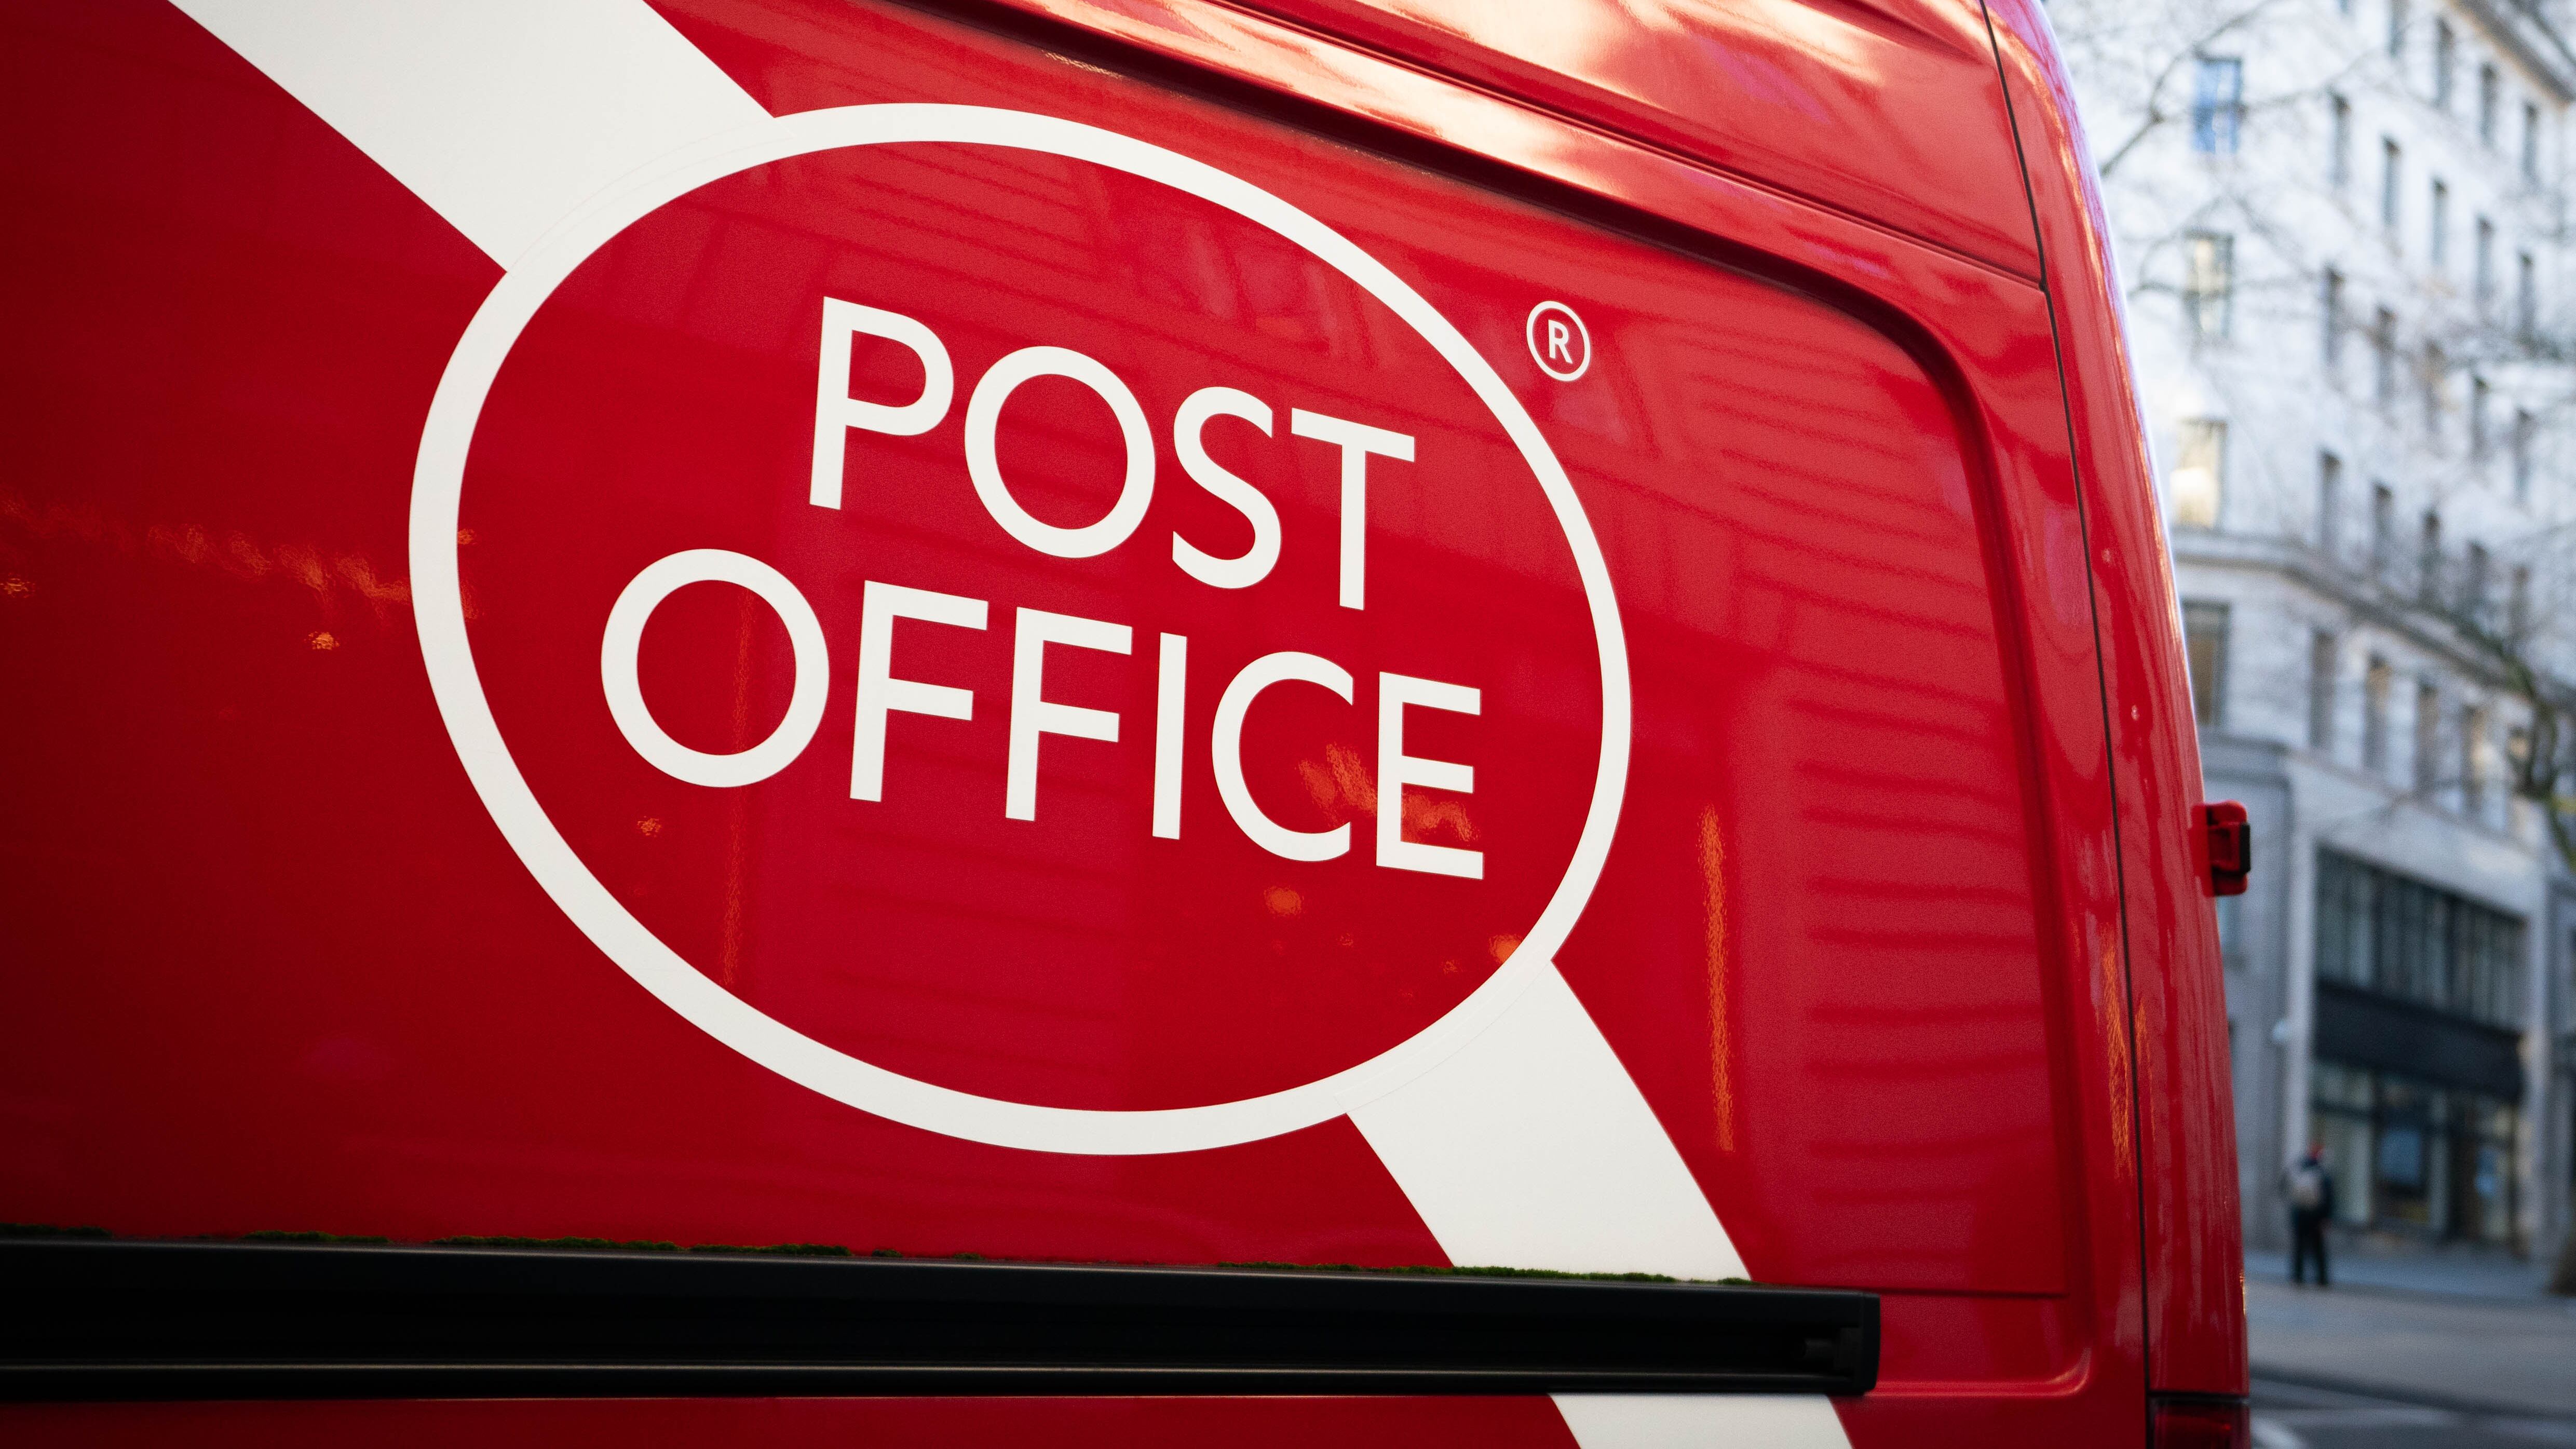 The Post Office told the BBC it will not comment while the public inquiry continues